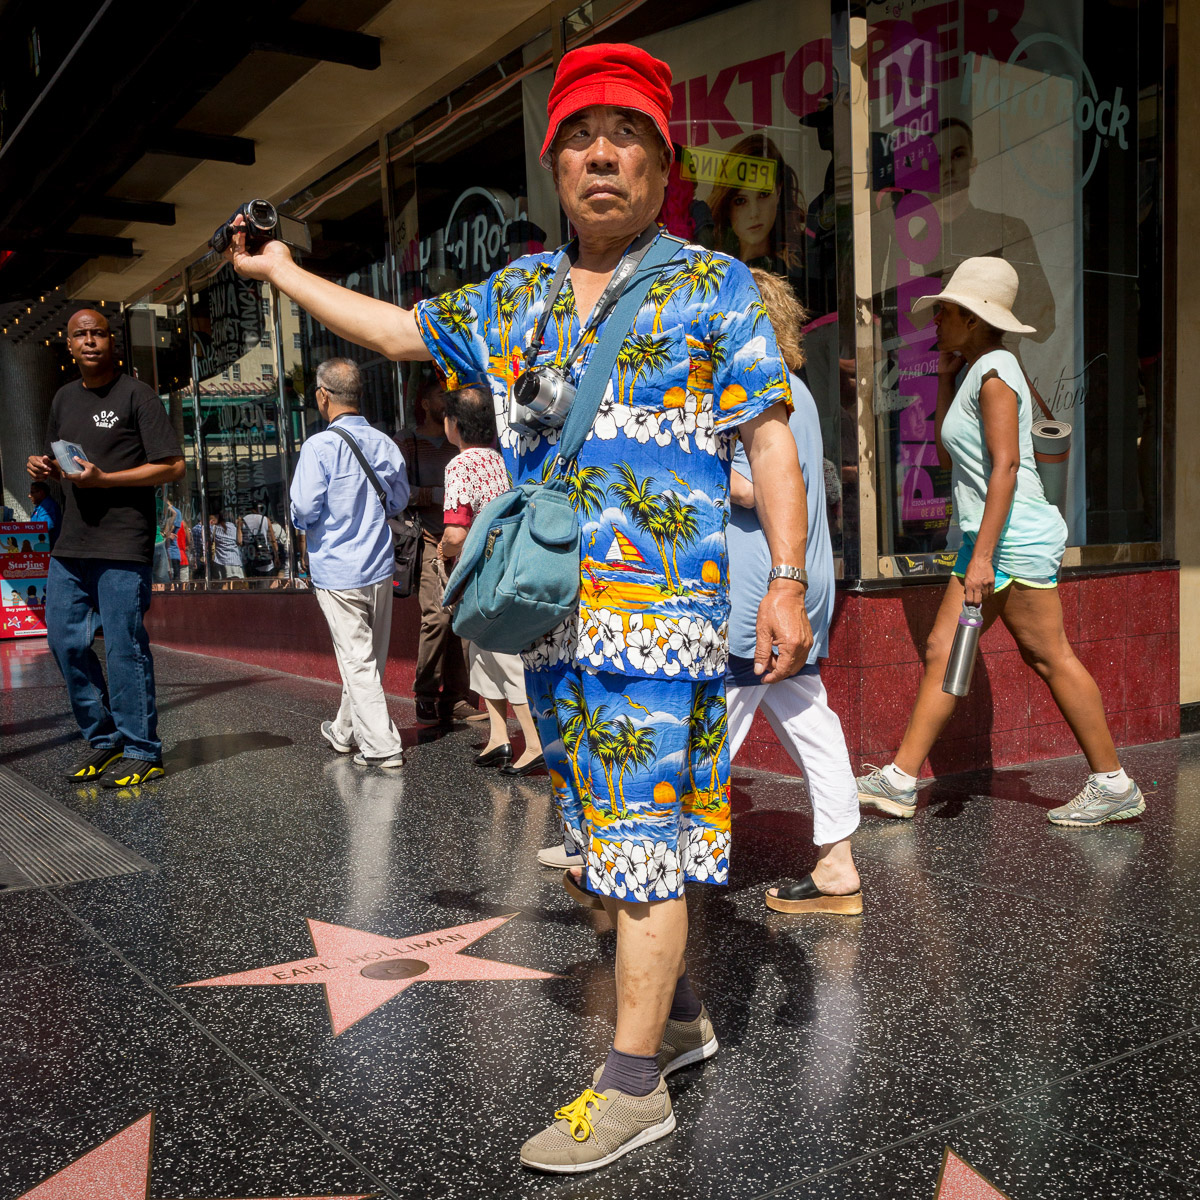 street photography Los Angeles hollywood street life superheroes characters Movies walk of fame hollywood boulevard tourists